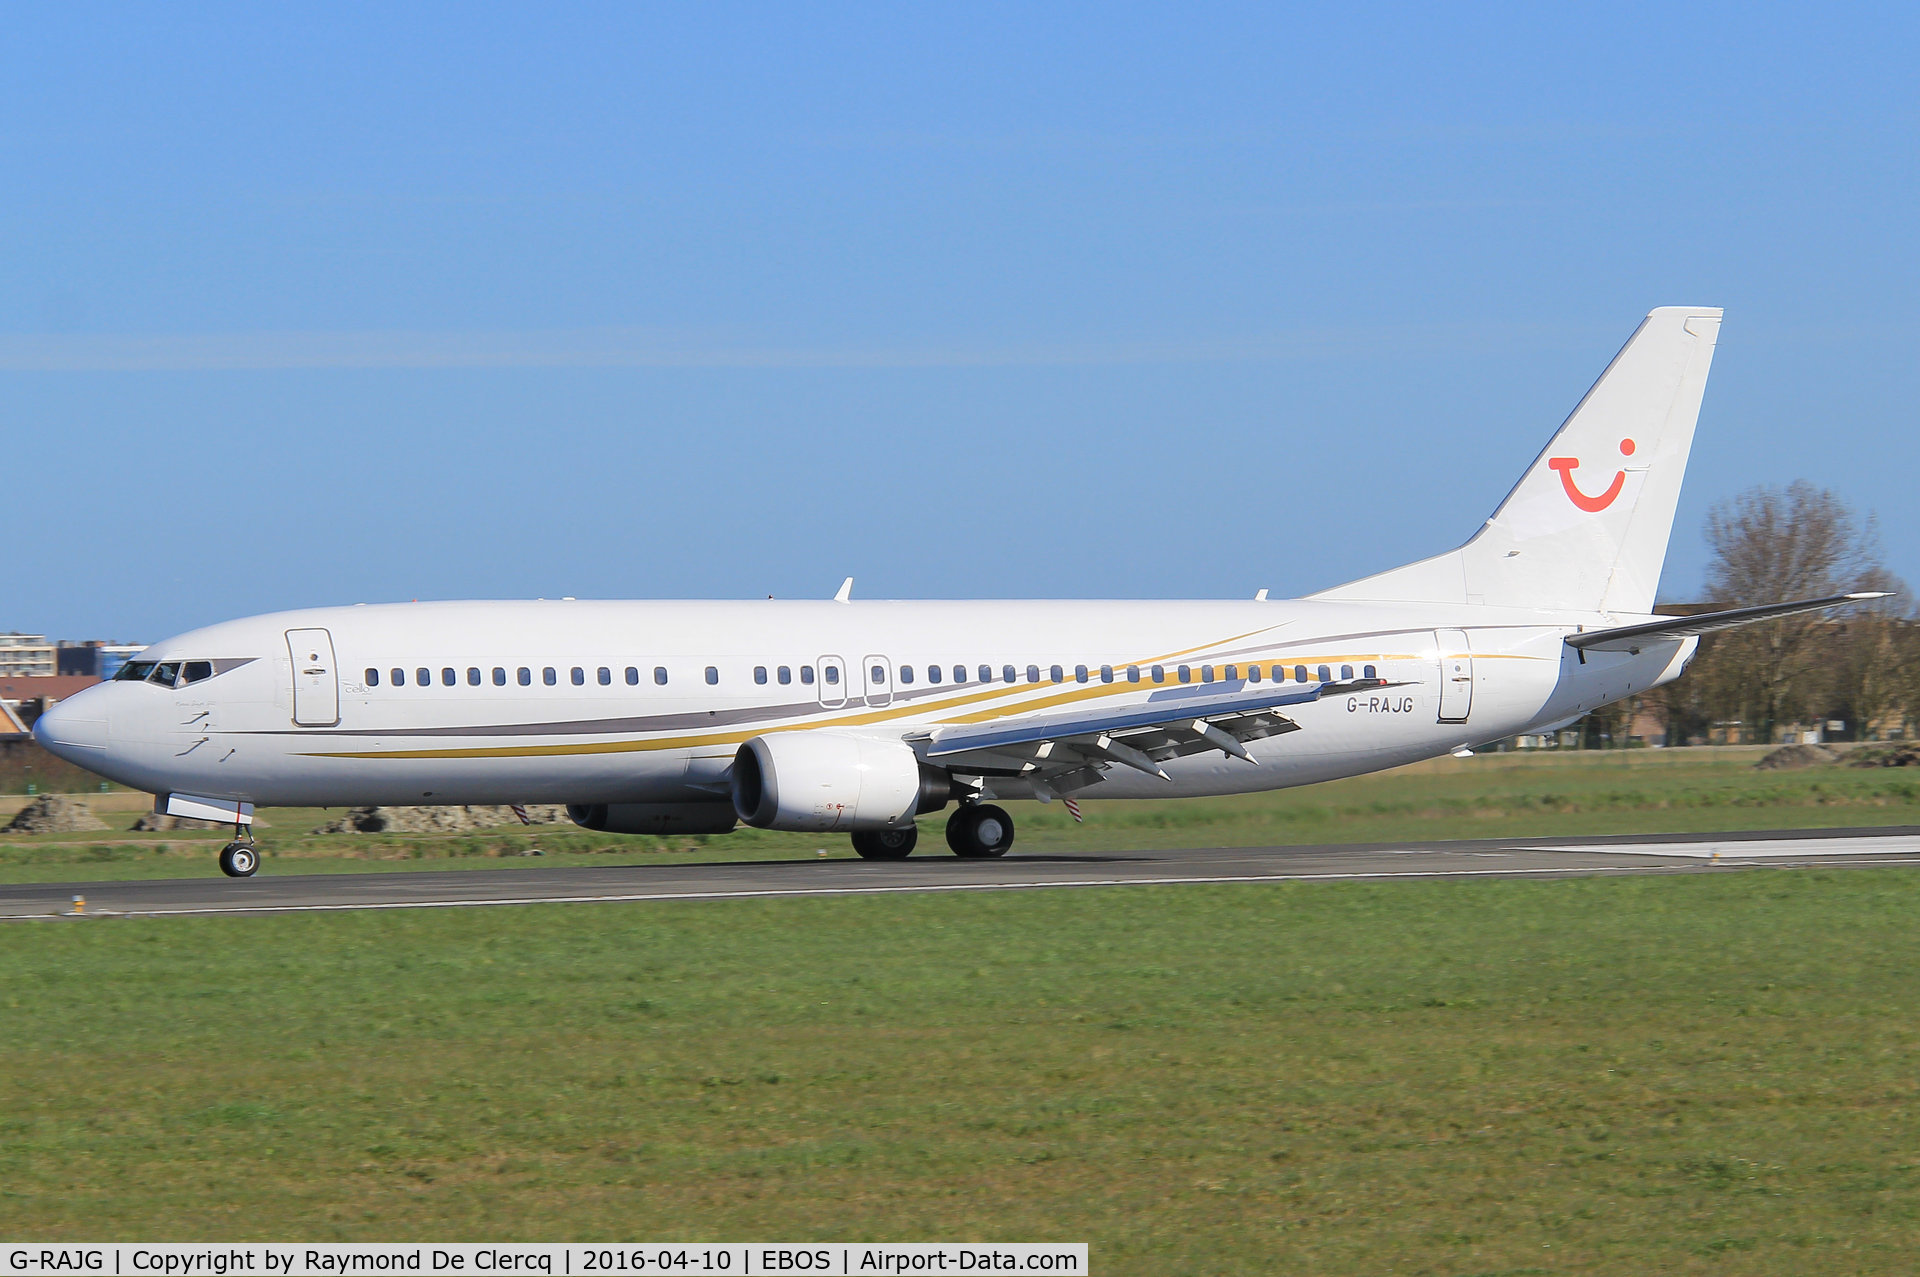 G-RAJG, 1992 Boeing 737-476 C/N 24439, G-RAJG is flying this summer season for TUI / Jetairfly from Ostend airport.